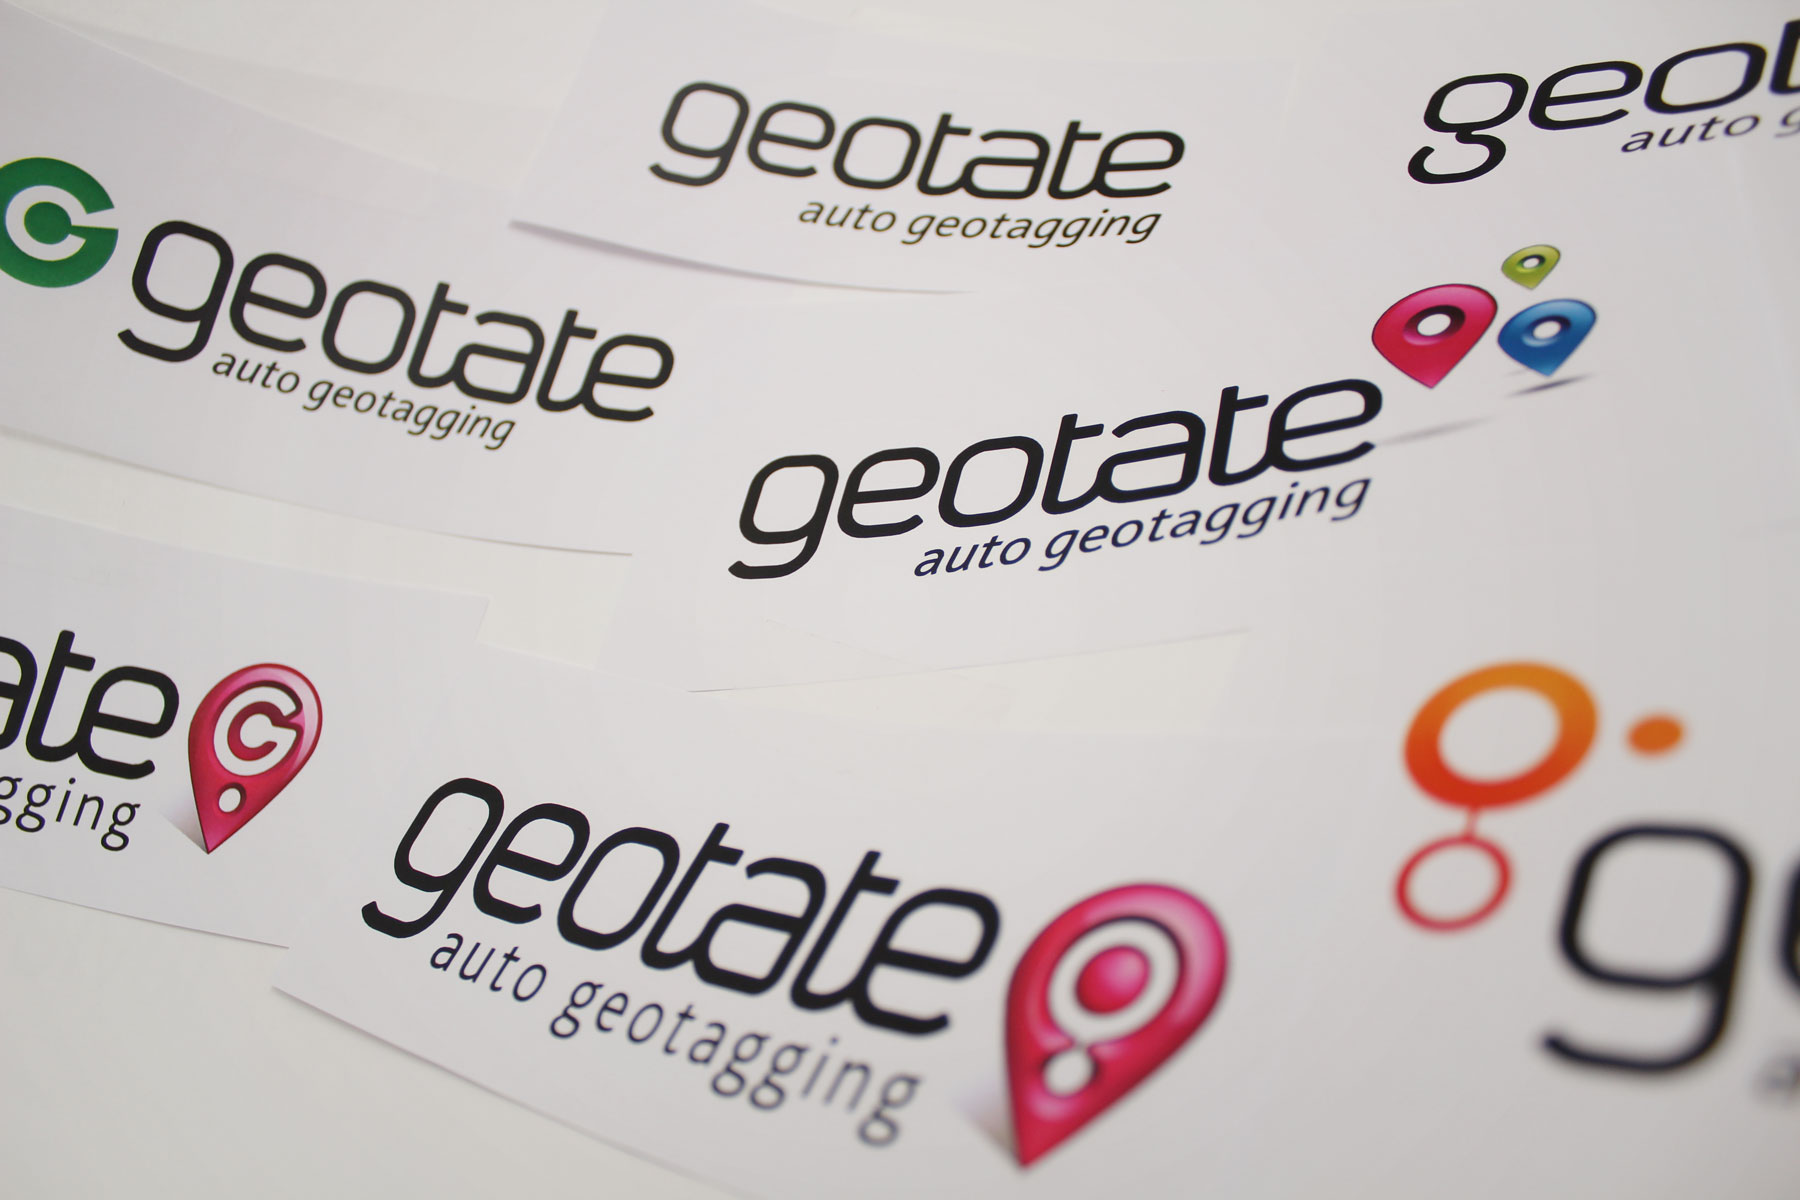 The iconography was combined with a bespoke wordmark - To make the brand truly unique. The auto geotagging proposition was developed to clearly convey the product offer.